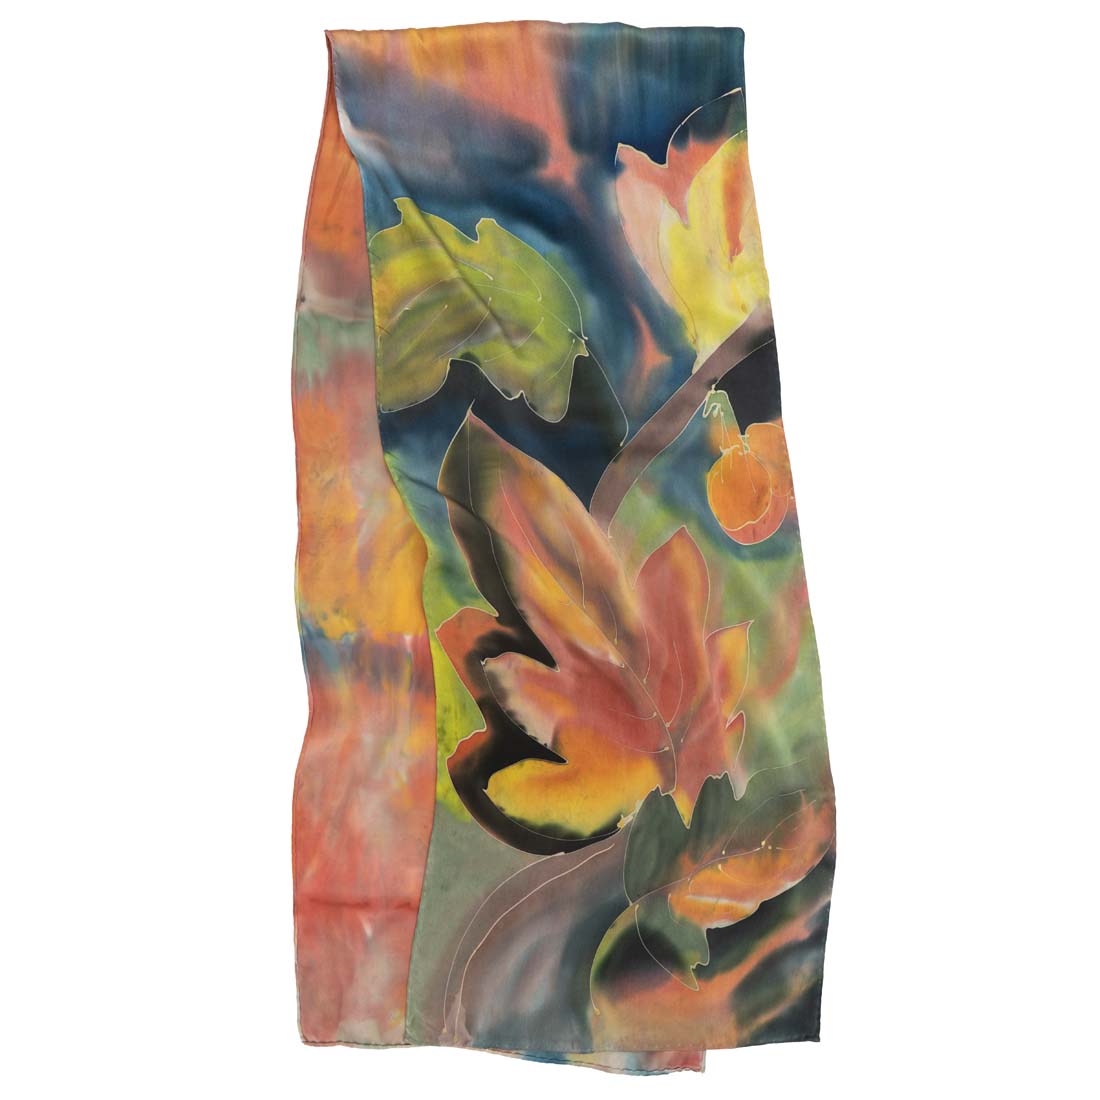 Falling Leaves Hand-Painted Silk Scarf